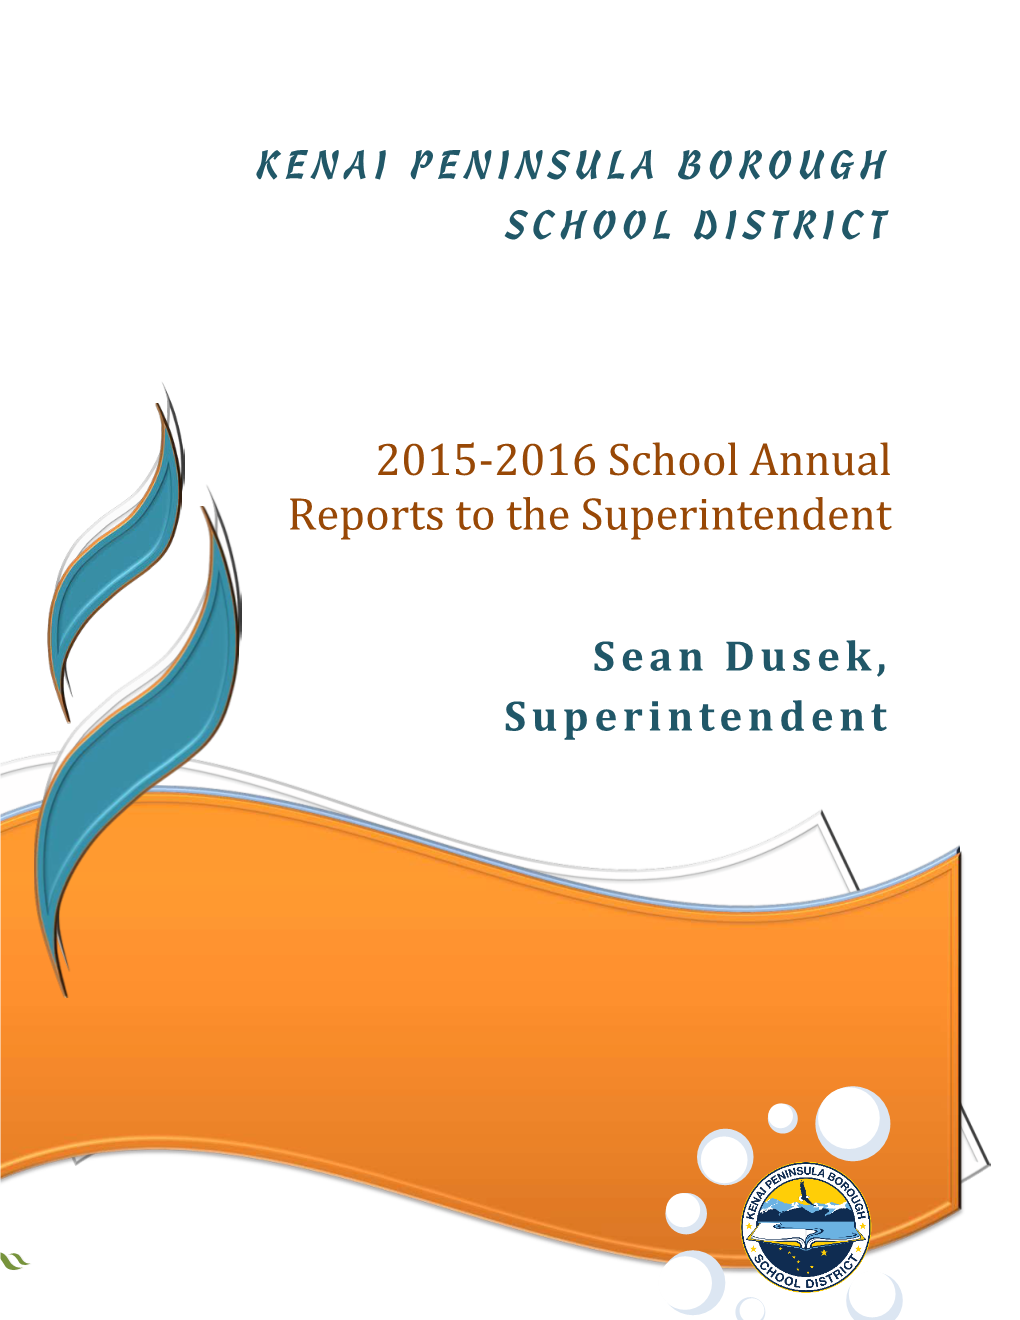 2015-2016 School Annual Reports to the Superintendent